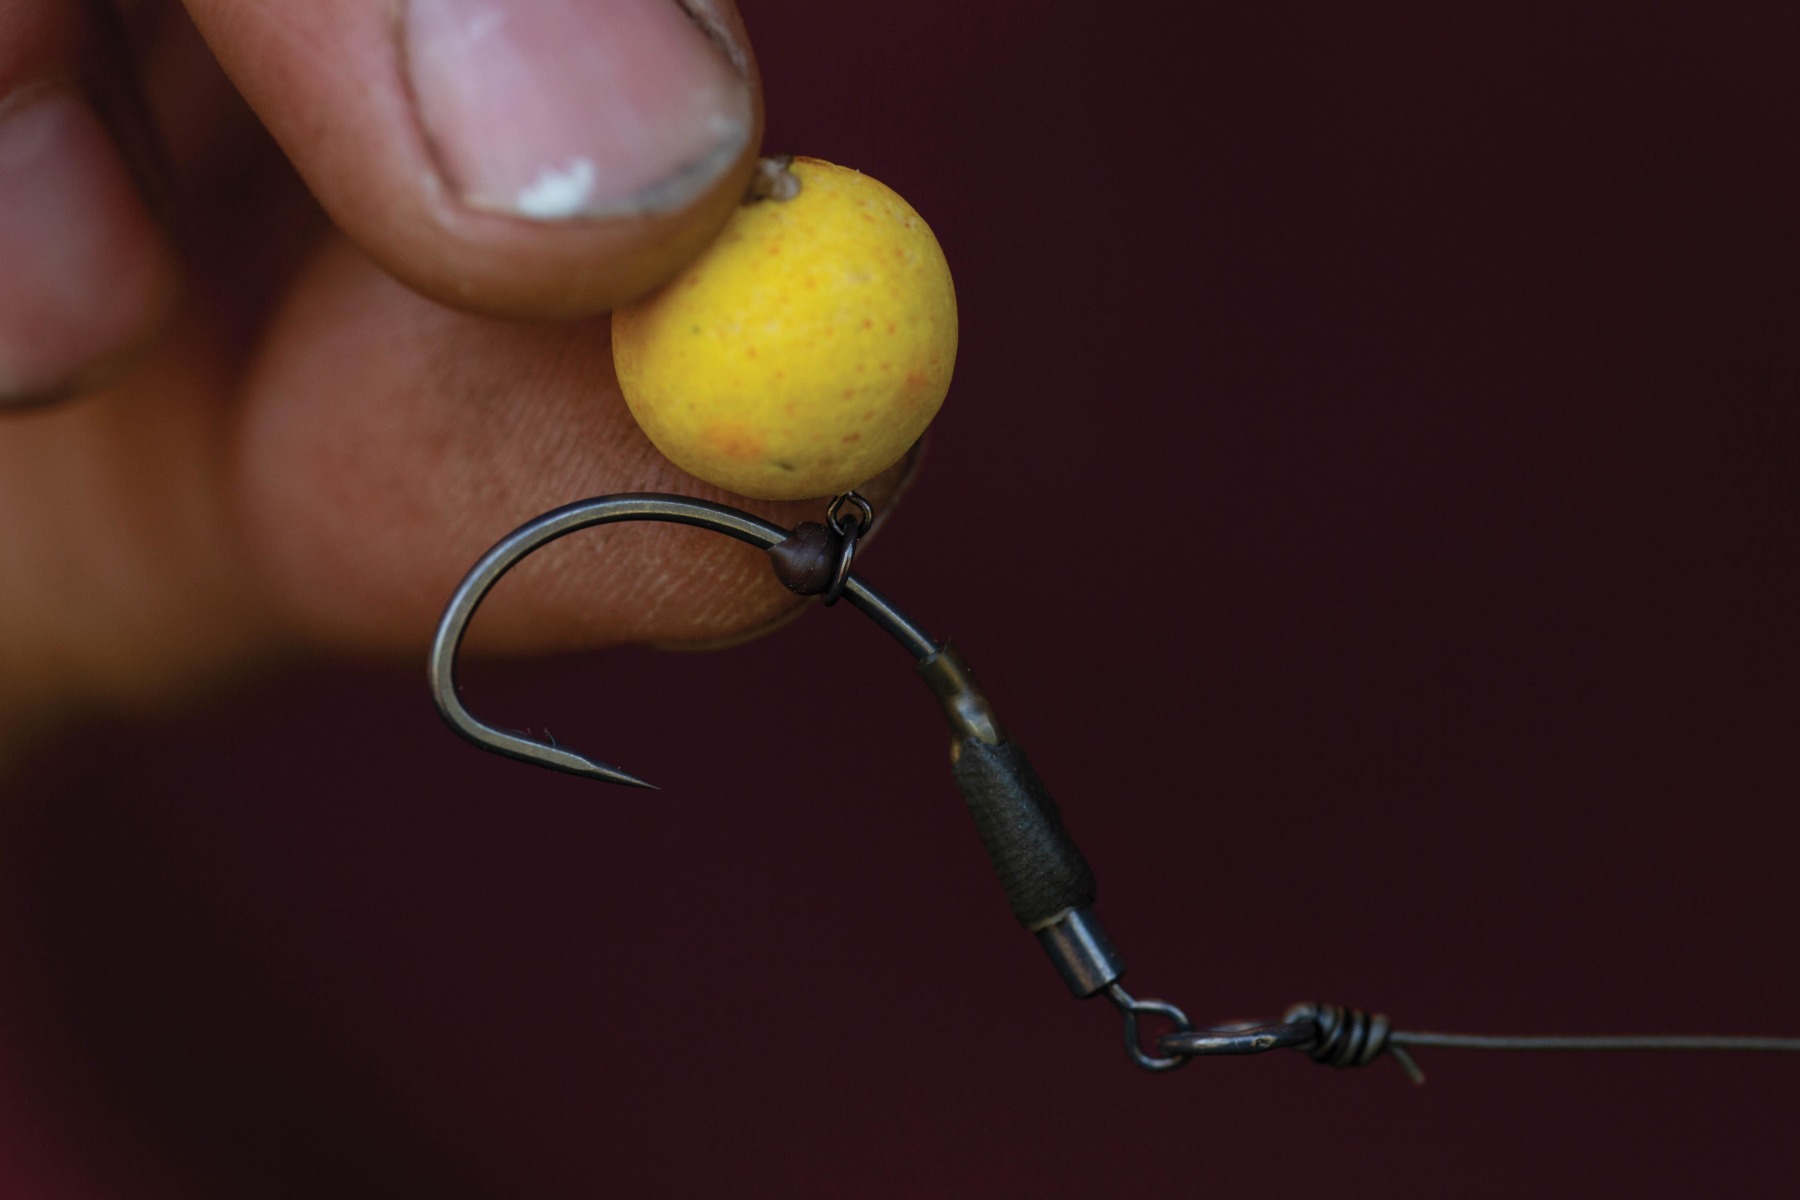 2. This shot shows how having the hook bead position too low affects it.